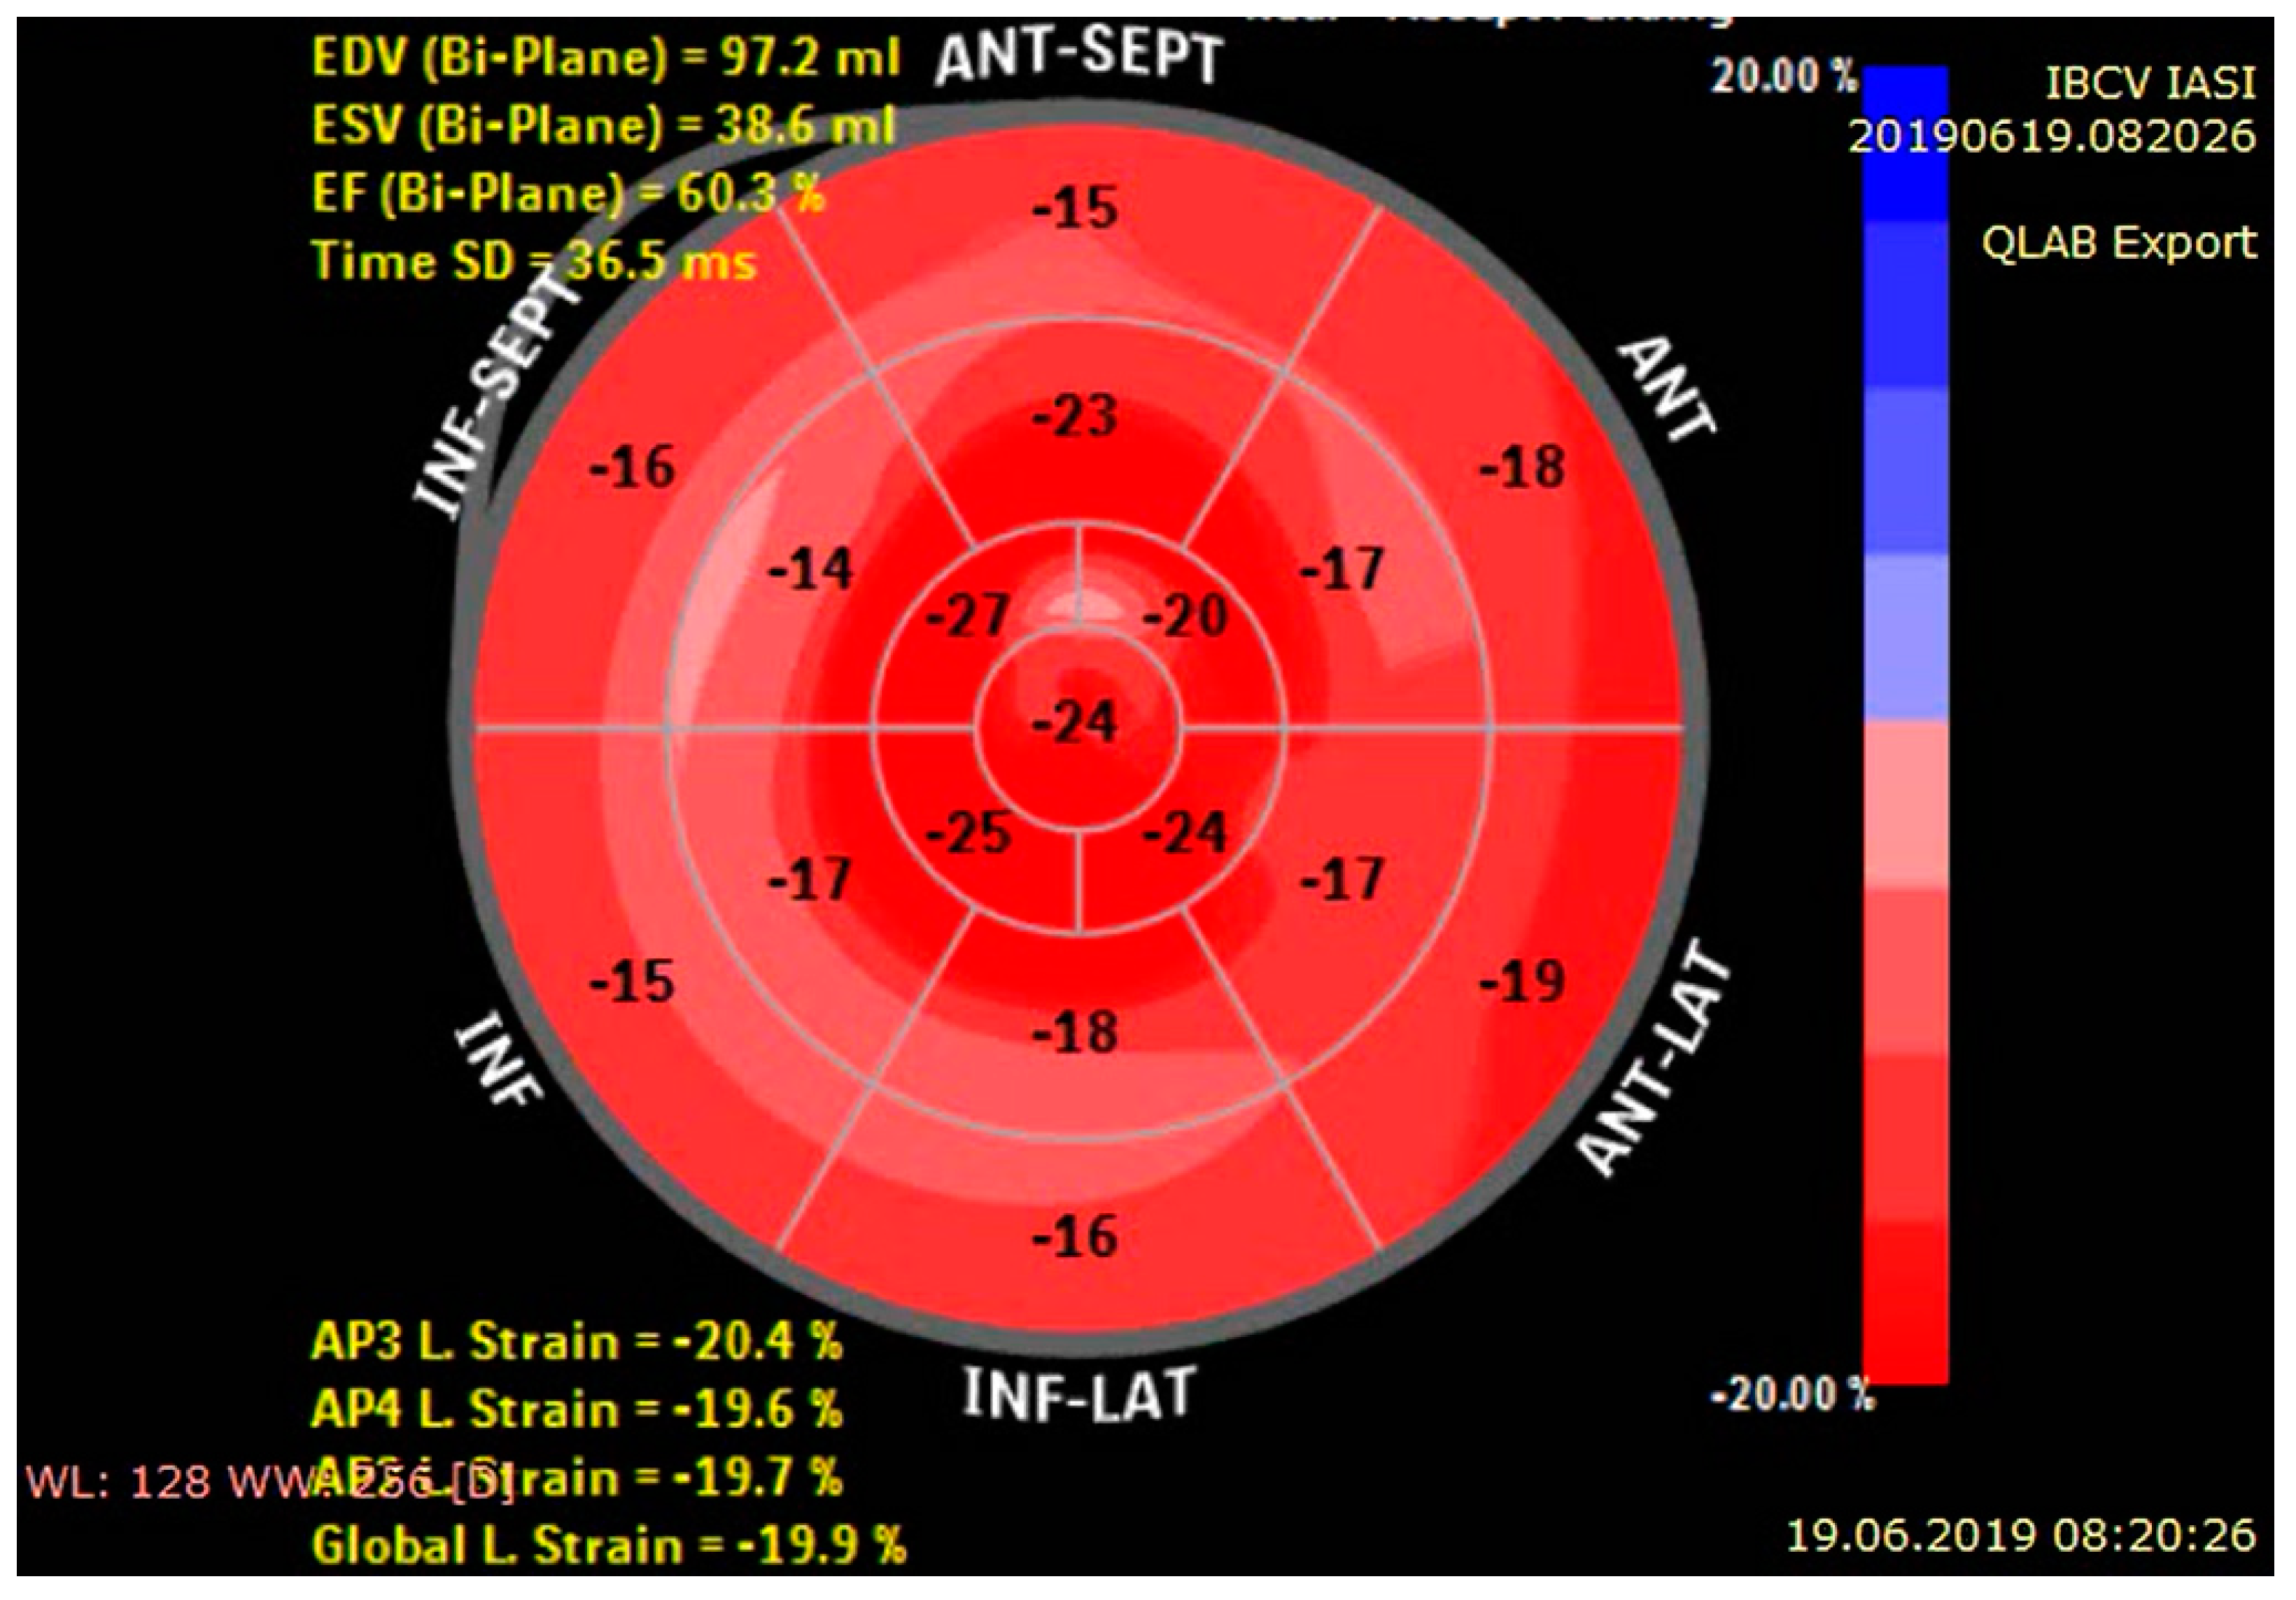 Longitudinal strain bull's eye plot patterns in patients with  cardiomyopathy and concentric left ventricular hypertrophy, European  Journal of Medical Research